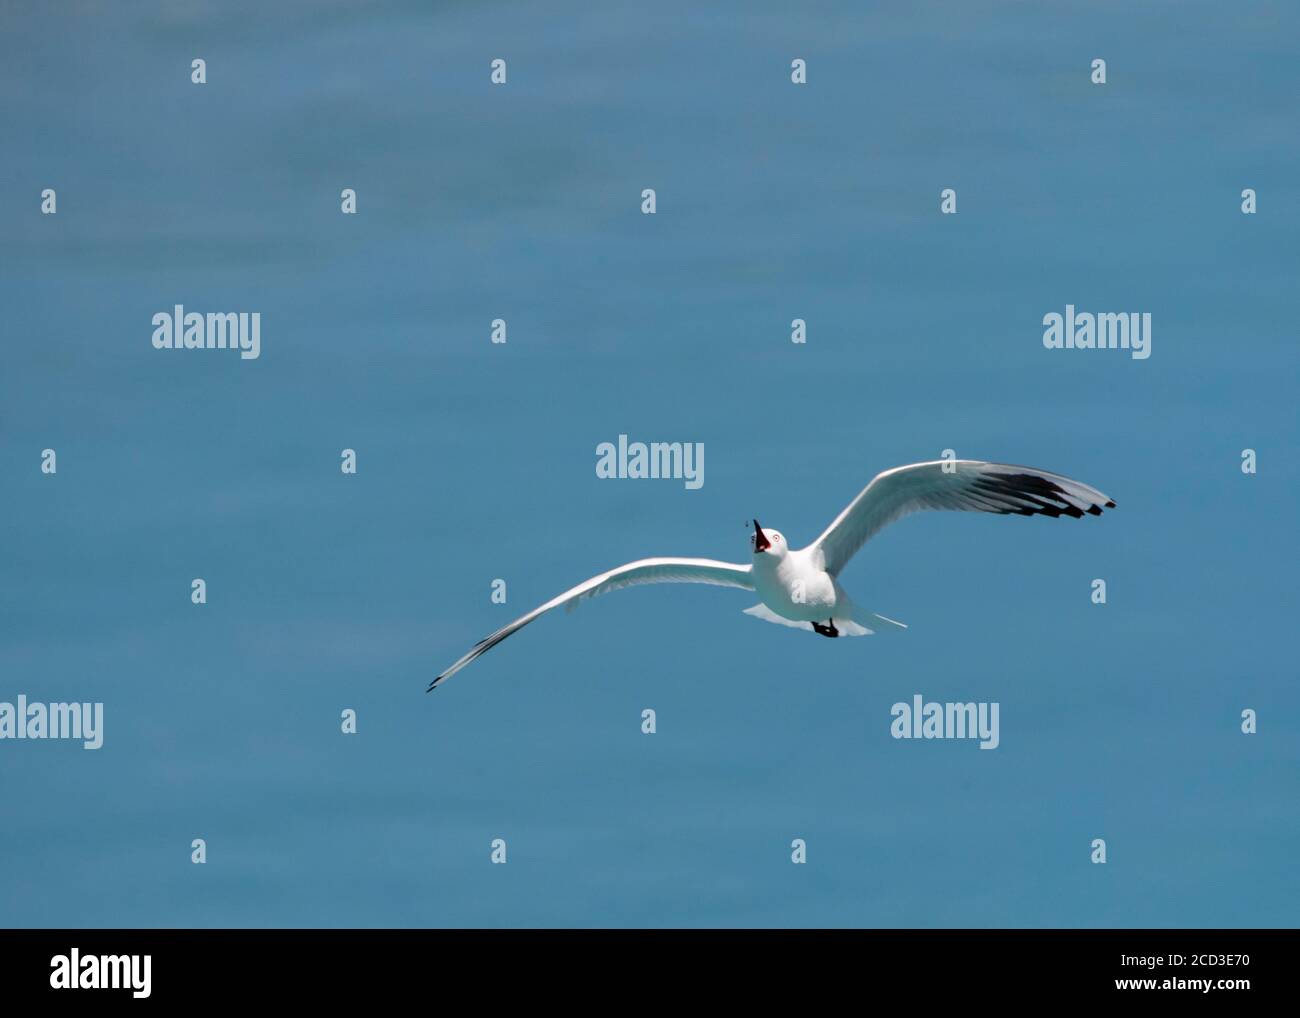 Buller's gull (Larus bulleri, Chroicocephalus bulleri), catching an insect above a blue colored river, New Zealand, Northern Island, Miranda Stock Photo